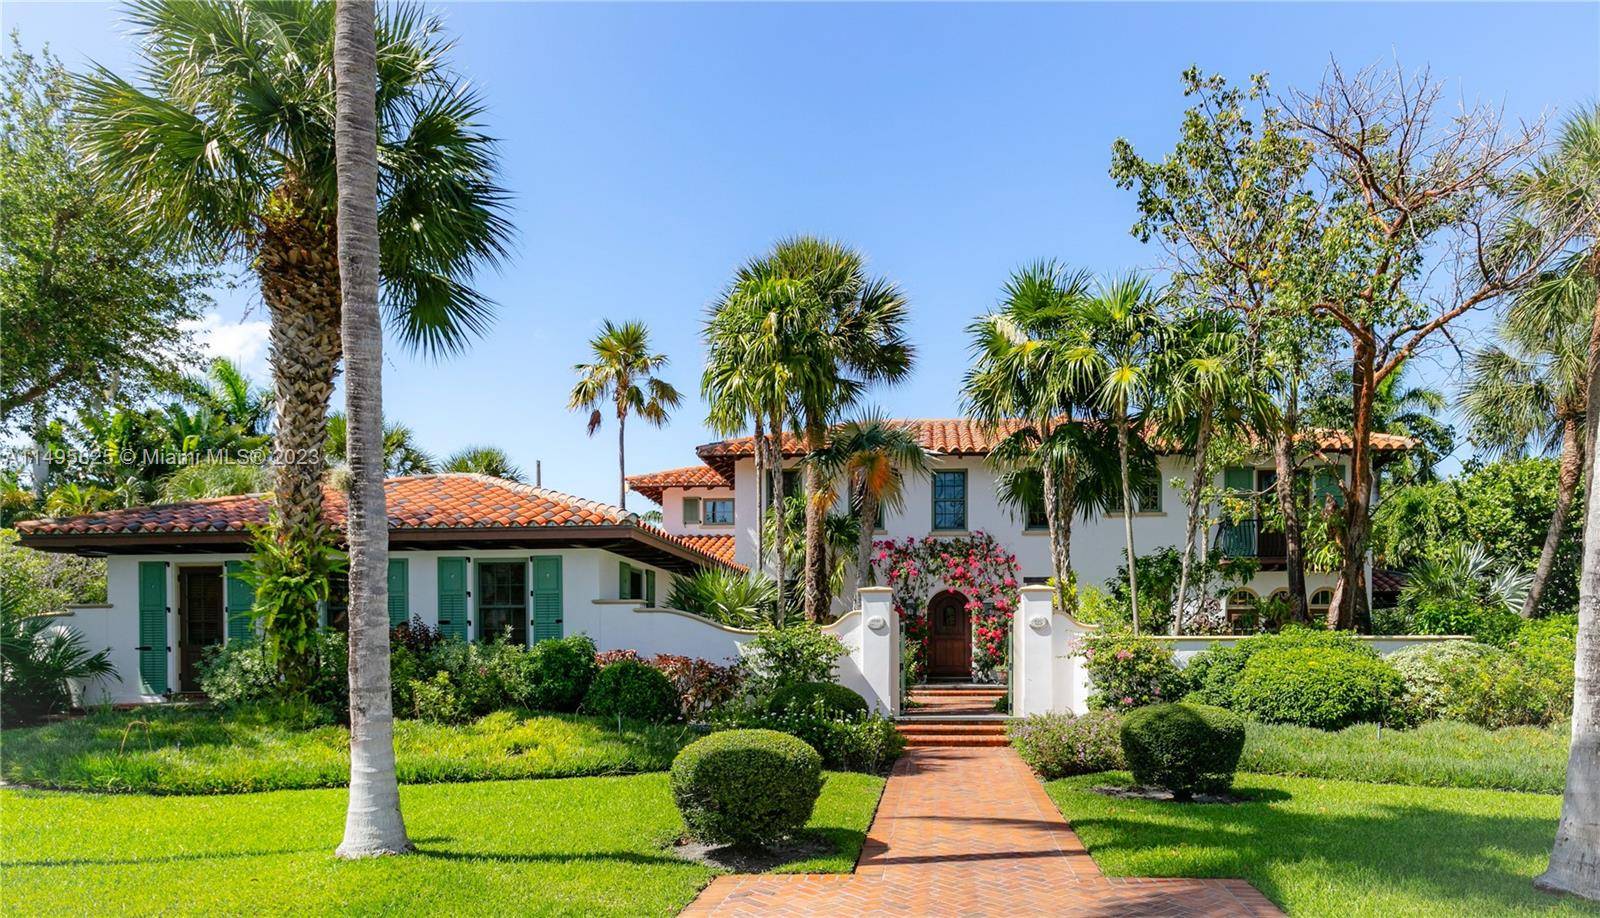 This two story Mediterranean revival home, originally built in 1924 by Millard Lightbrown and registered as a historic property, underwent a complete rebuild in 2006.